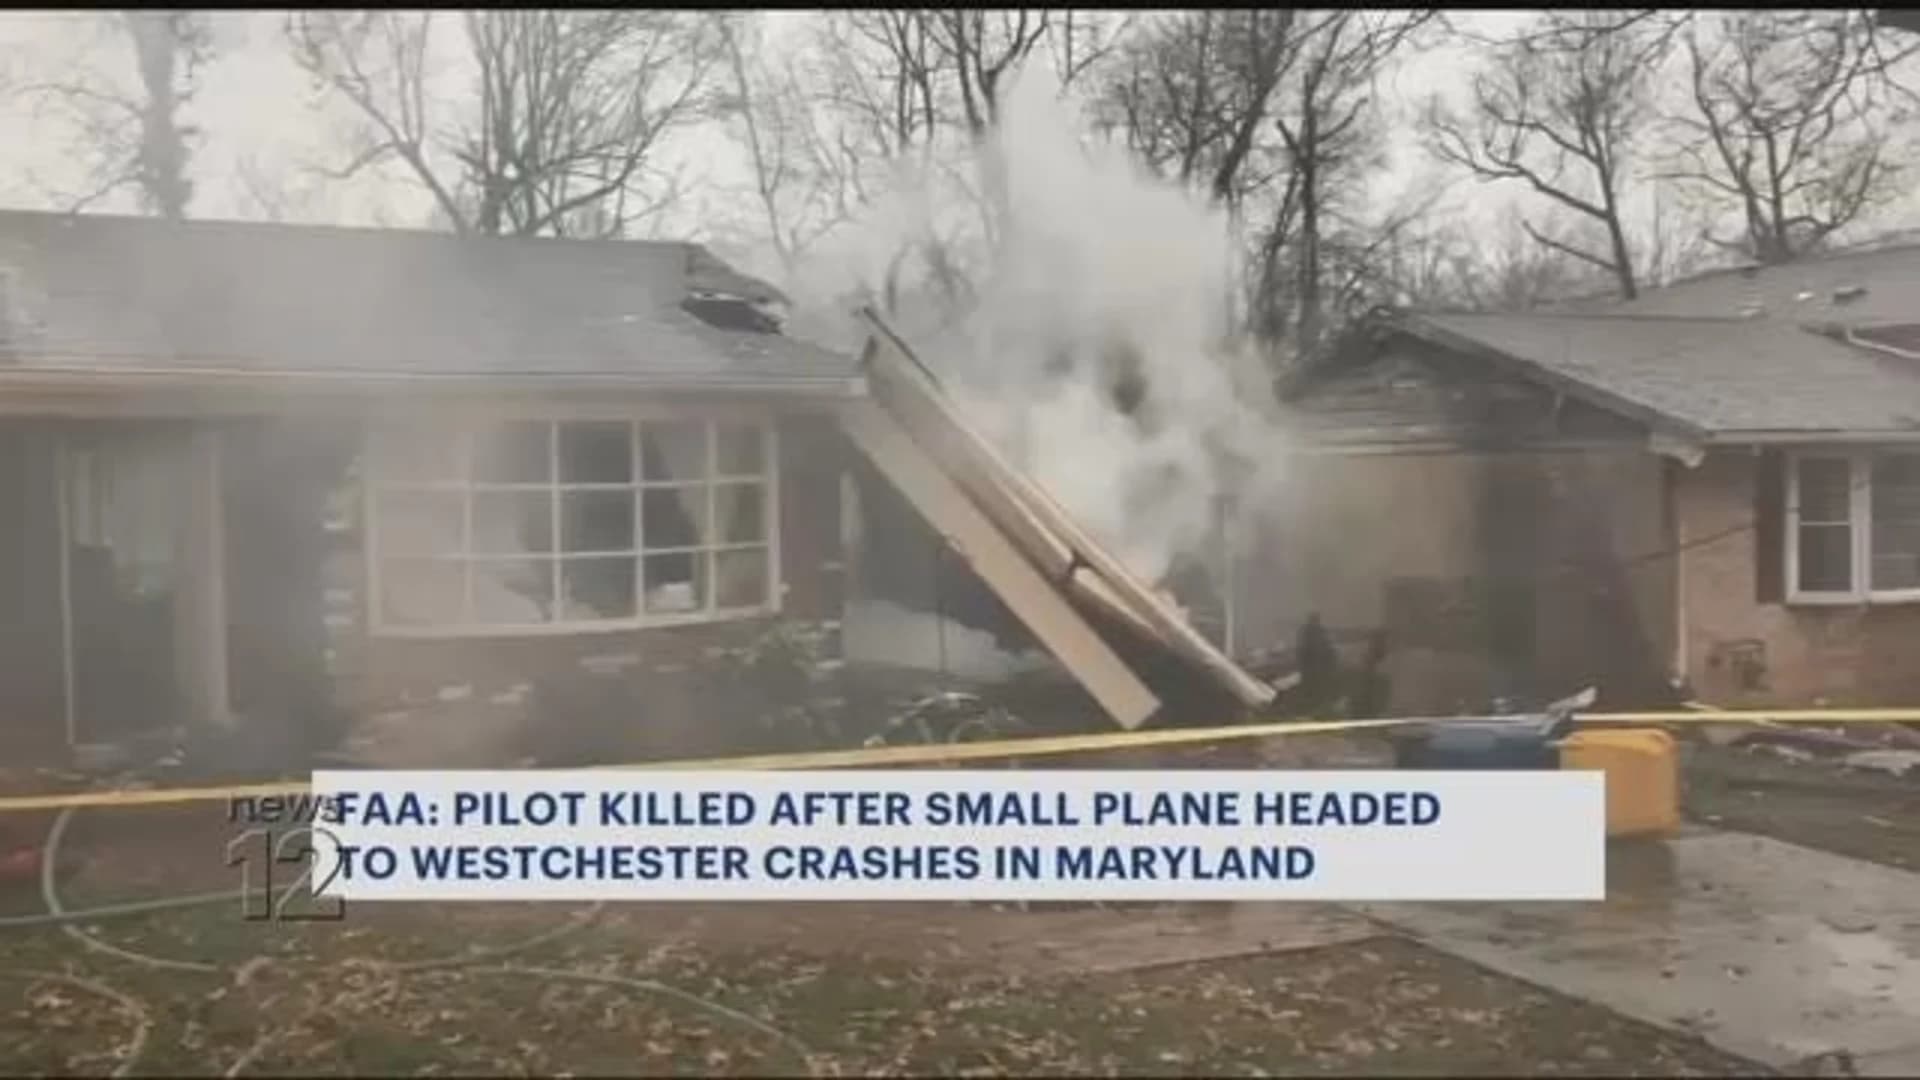 Officials: Pilot killed in MD crash was en route to Westchester County Airport